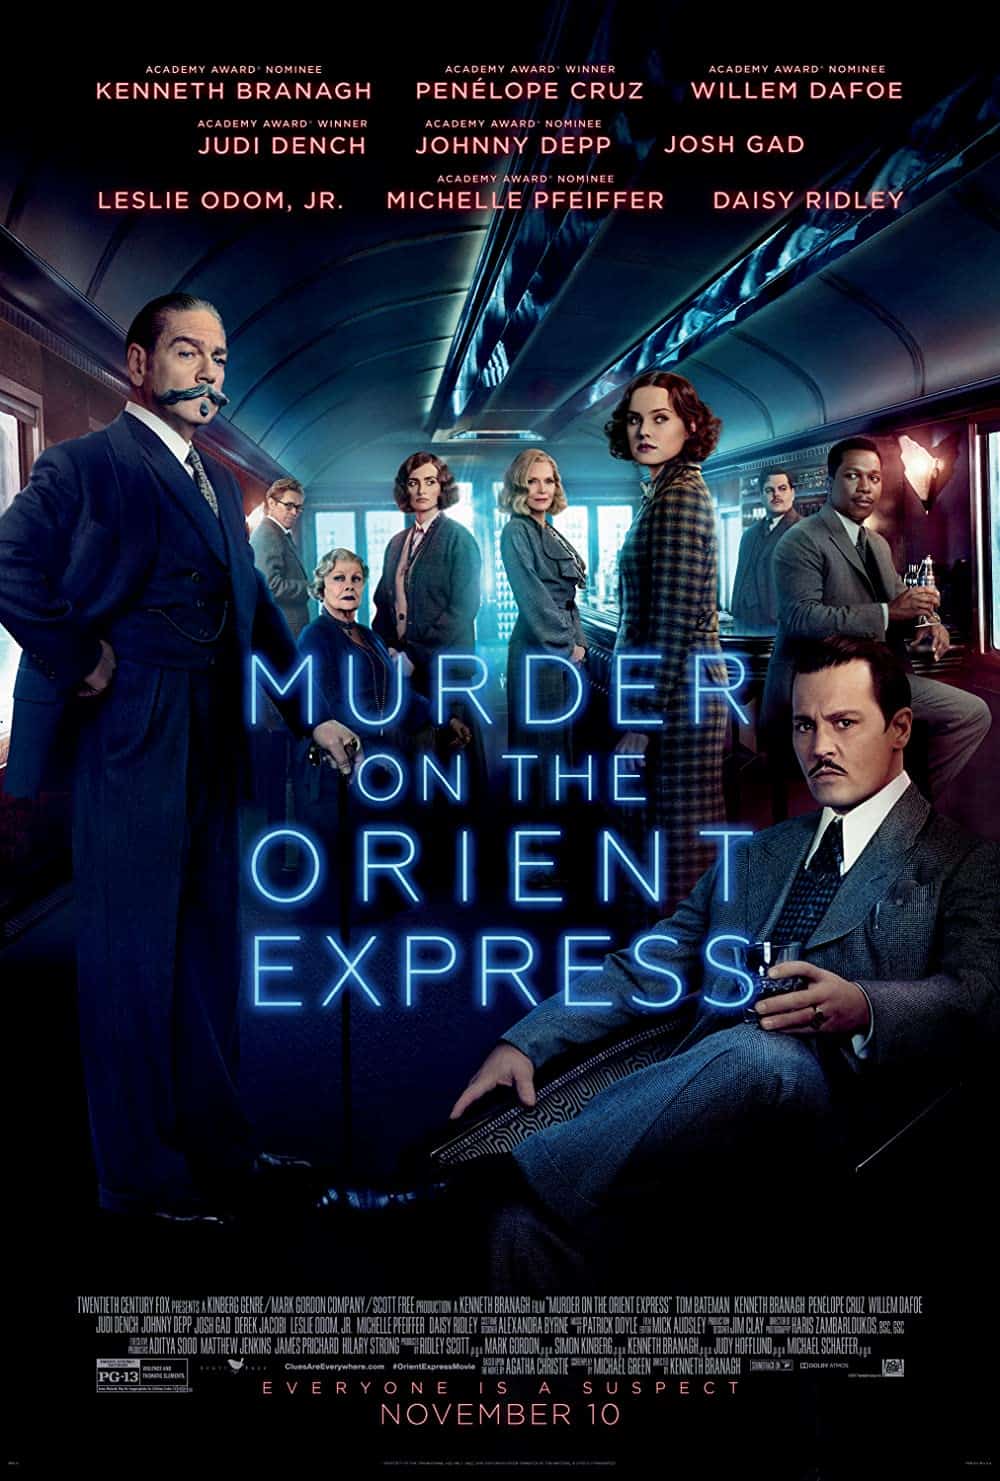 Murder on the Orient Express (2017) Best Train Movies You Can't Miss